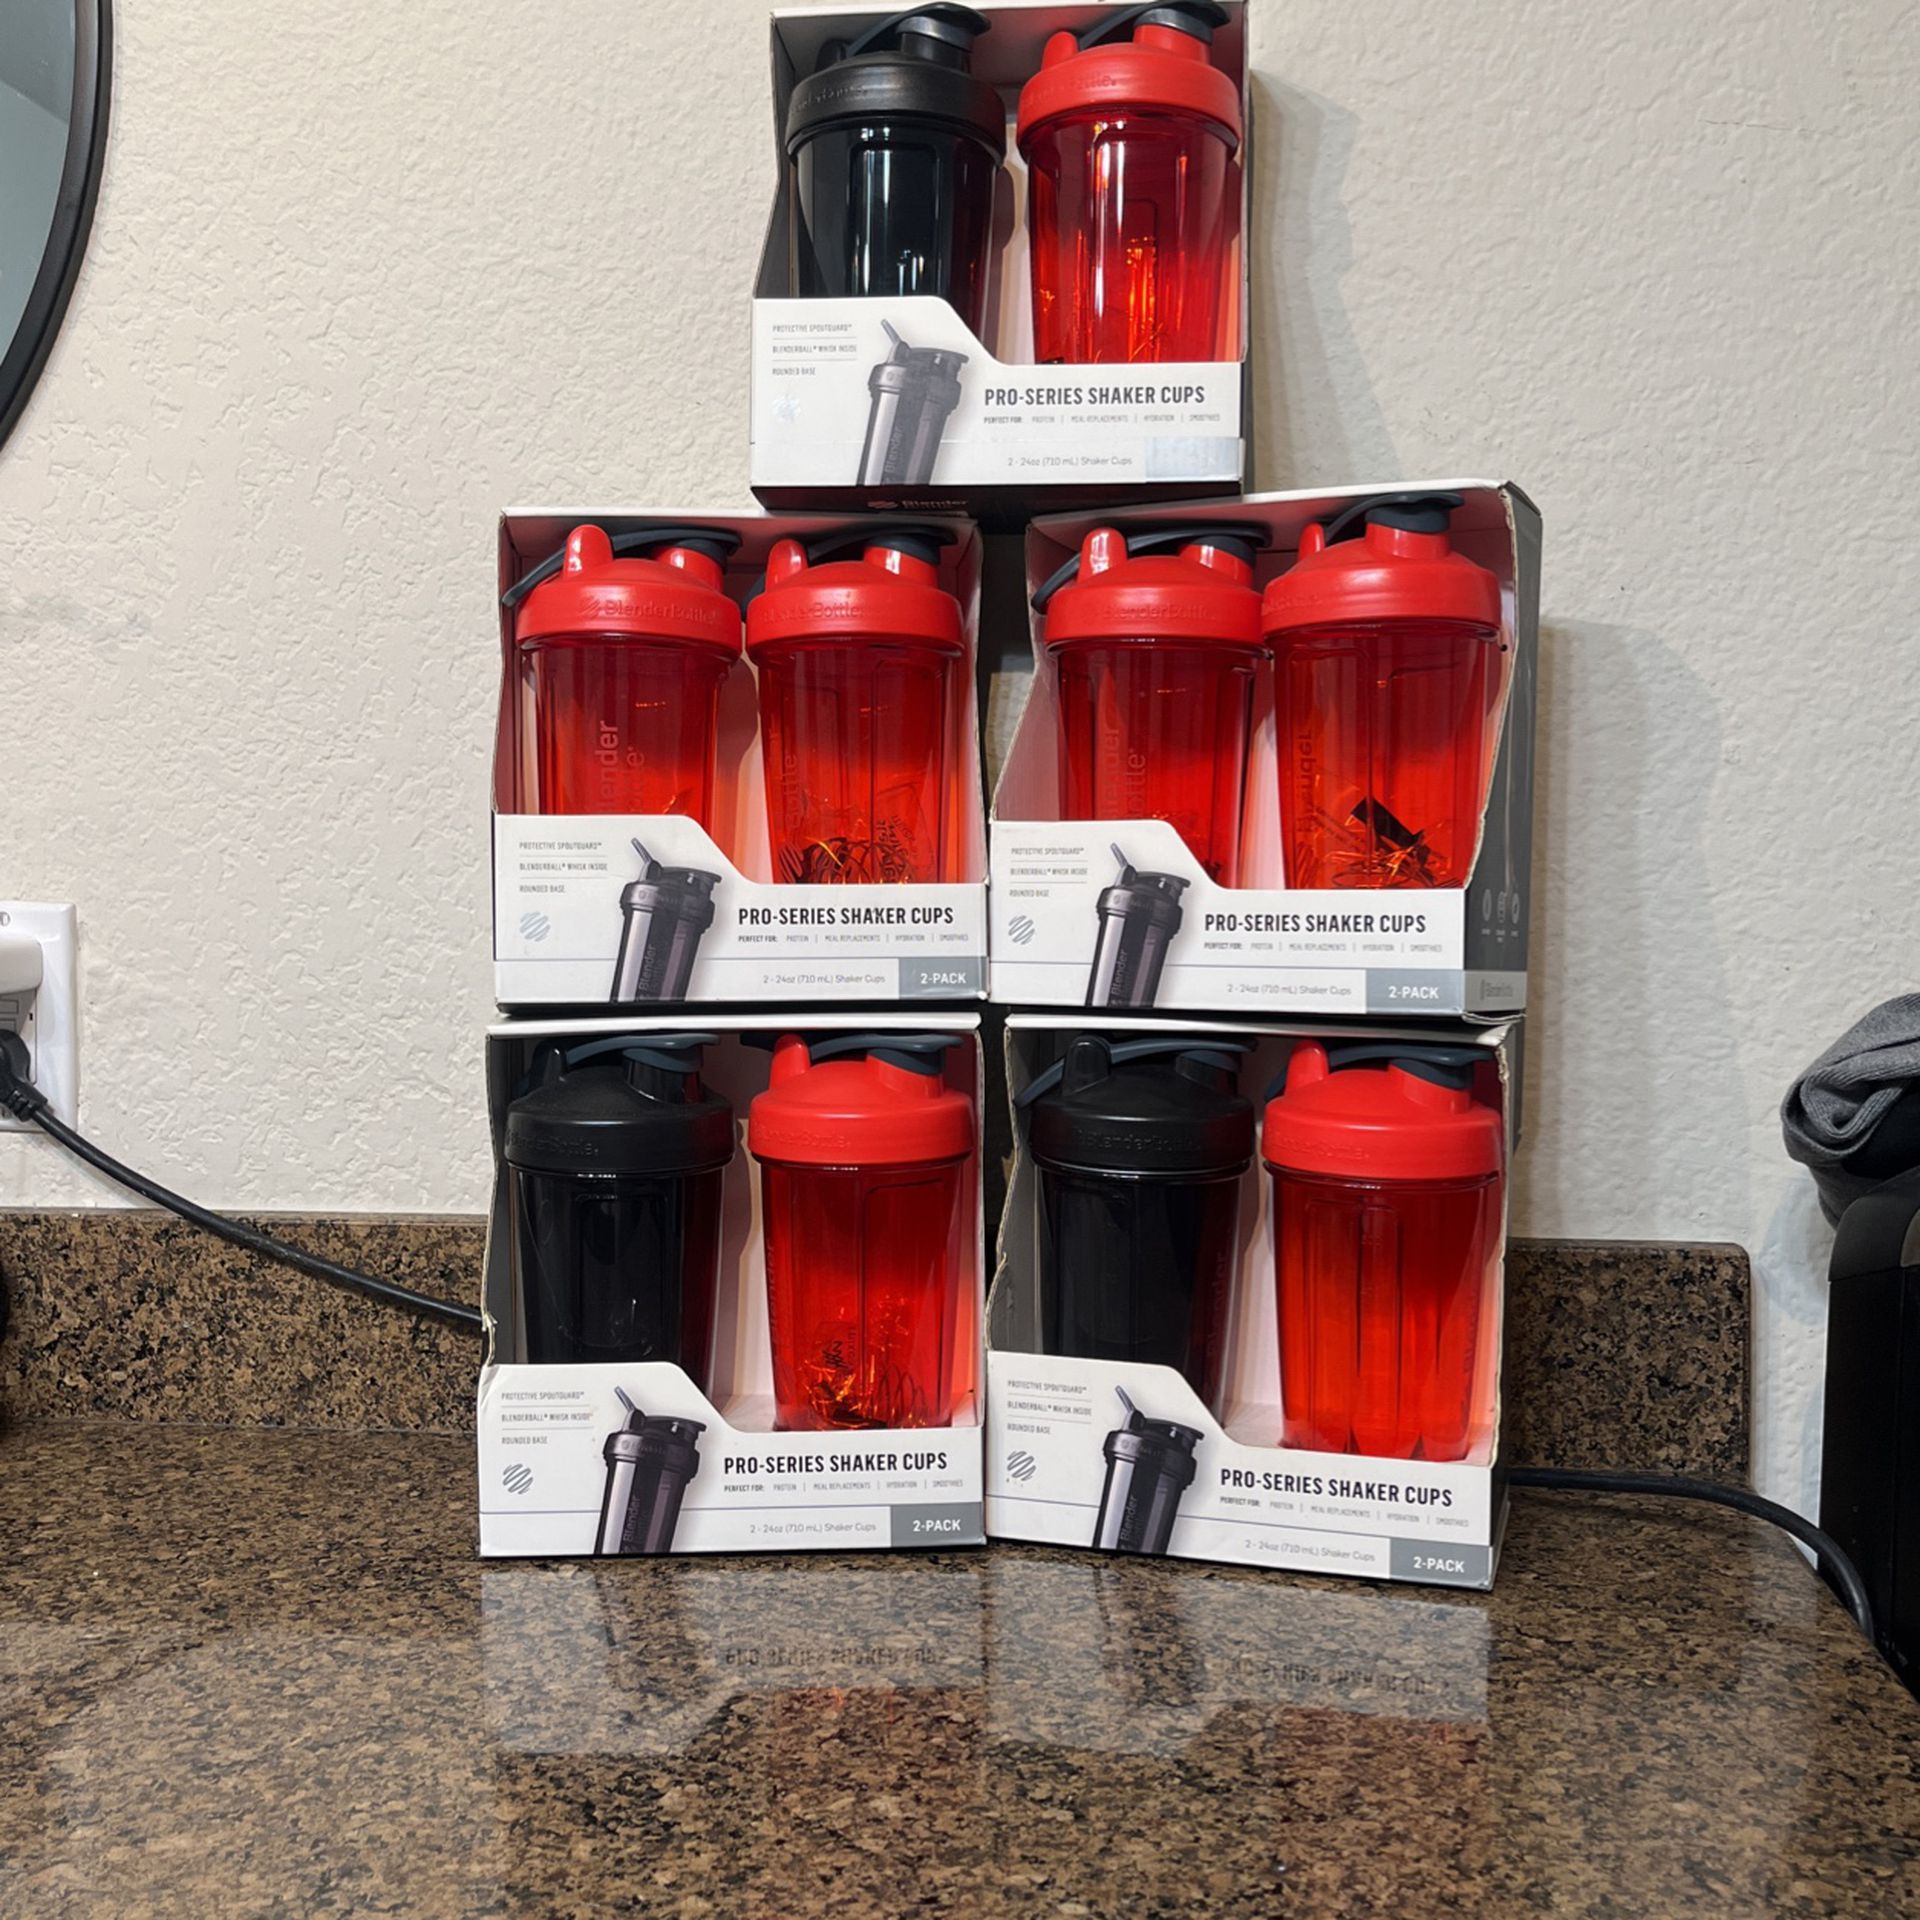 Costco! BlenderBottle Pro24 Shaker Cup, 2-pack for $14 